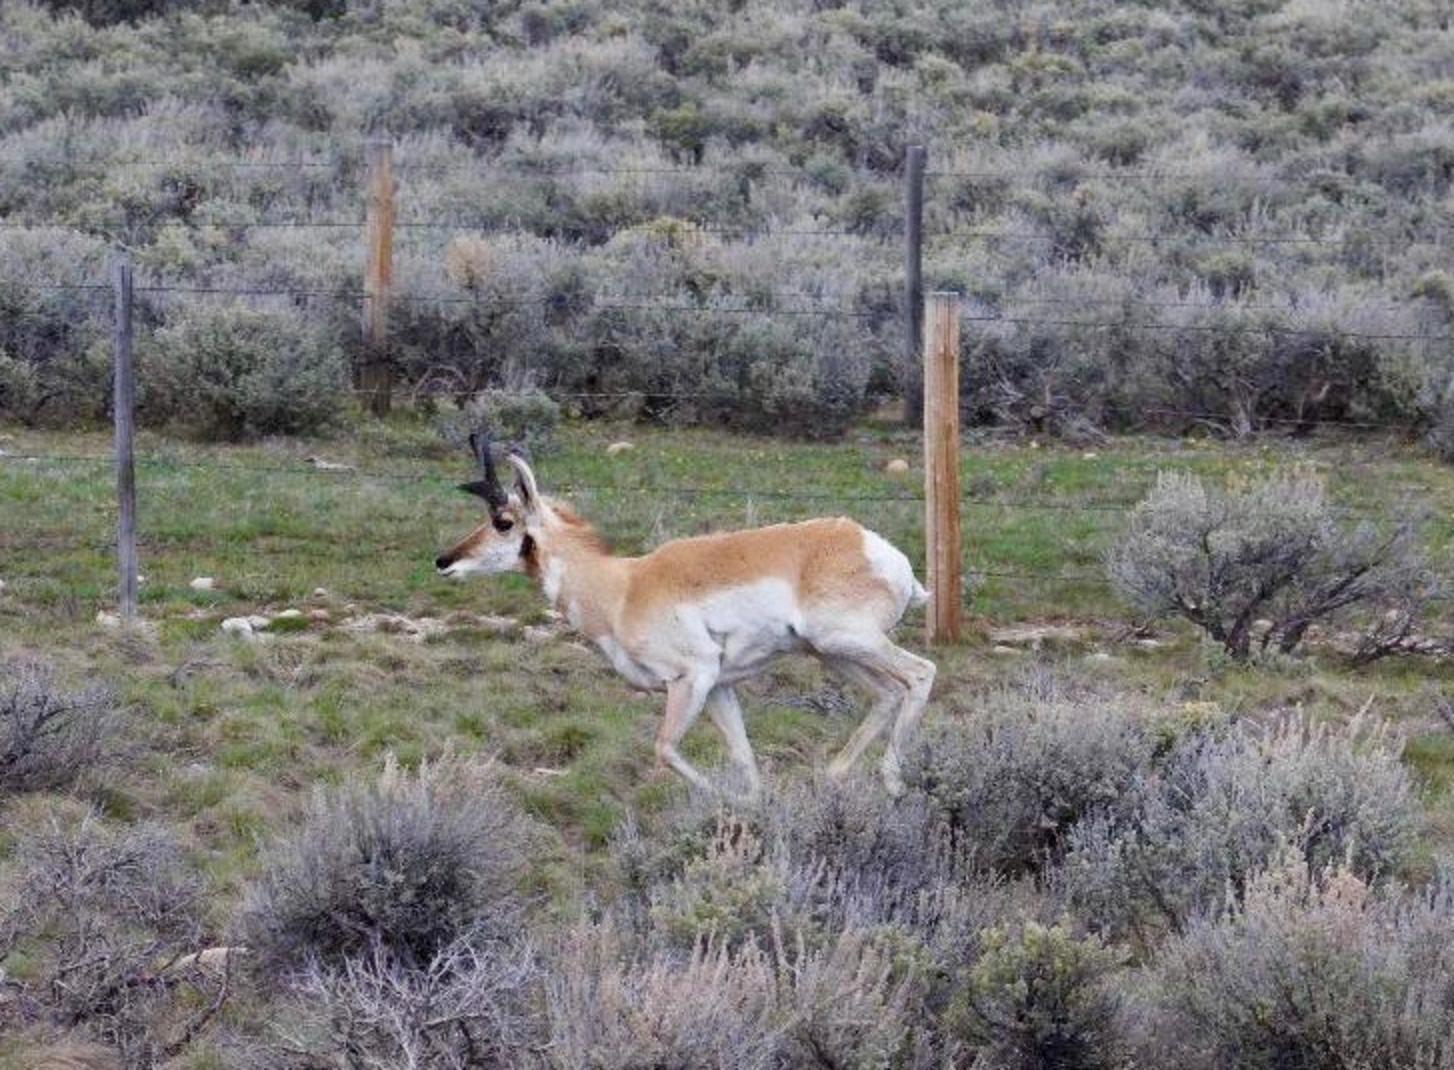 Every spring, pronghorn that spend their winters in the Upper Green River Basin in Wyoming migrate north through the Hoback and on to their summer grounds in Jackson Hole—a remarkable journey but fraught with sometimes deadly obstacles. 